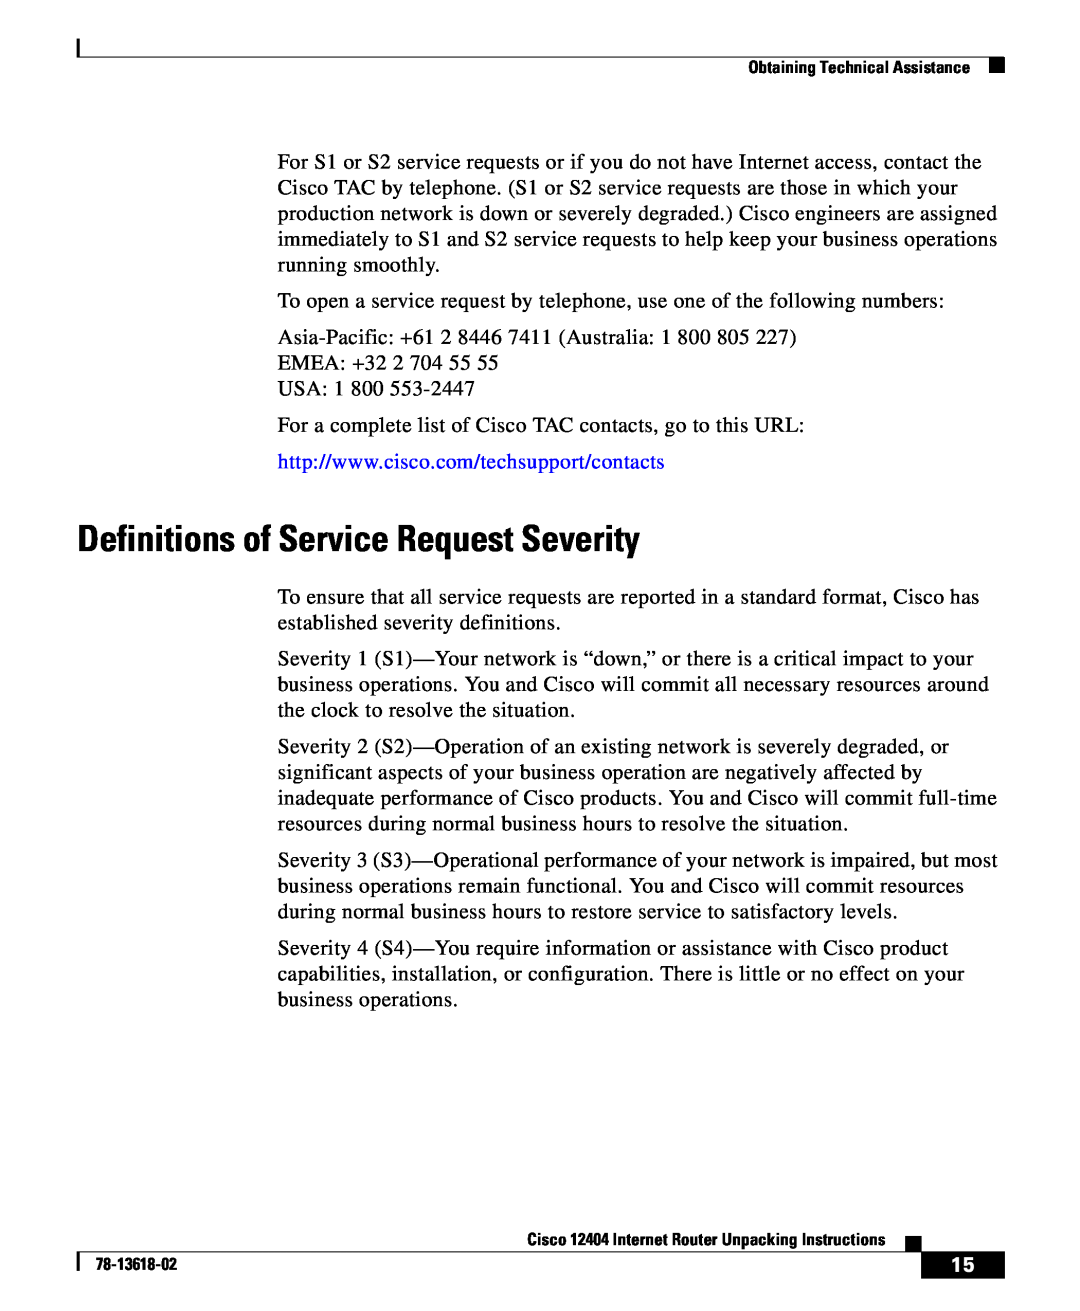 Cisco Systems 12404 manual Definitions of Service Request Severity 